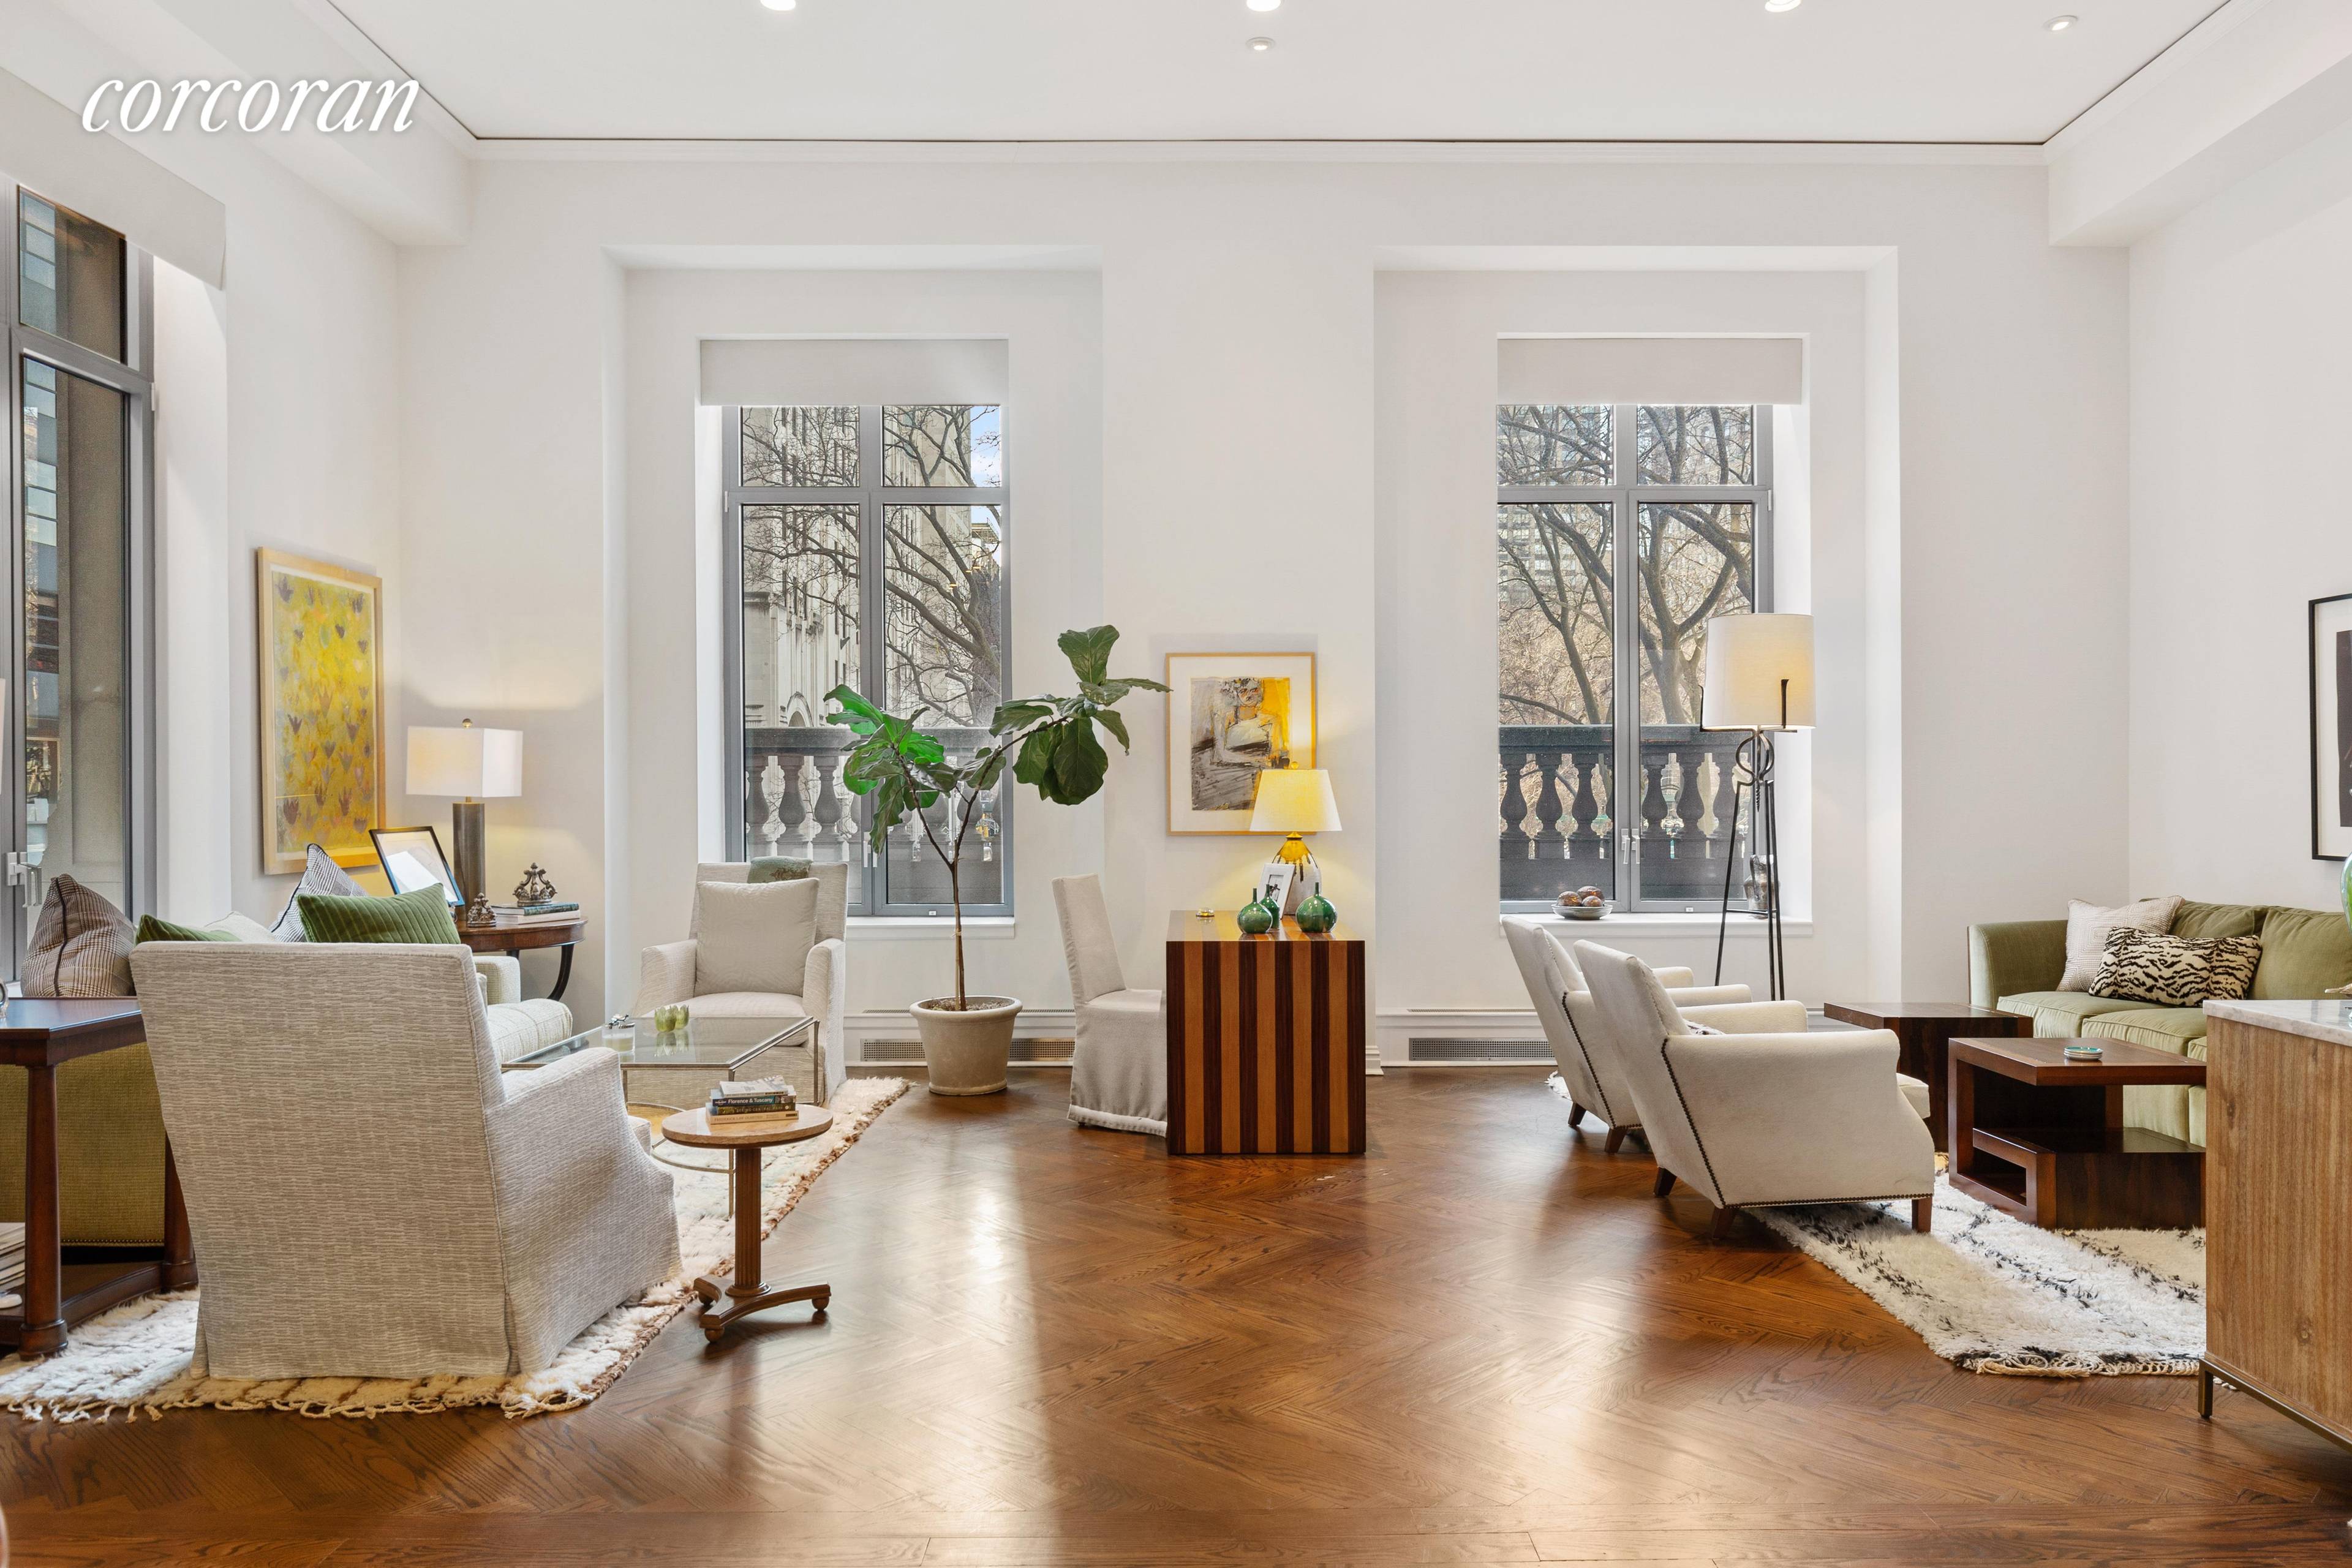 Nestled on the North East corner of Madison Square Park, 50 Madison Avenue 2 is a spectacular 3 bedroom, 3.